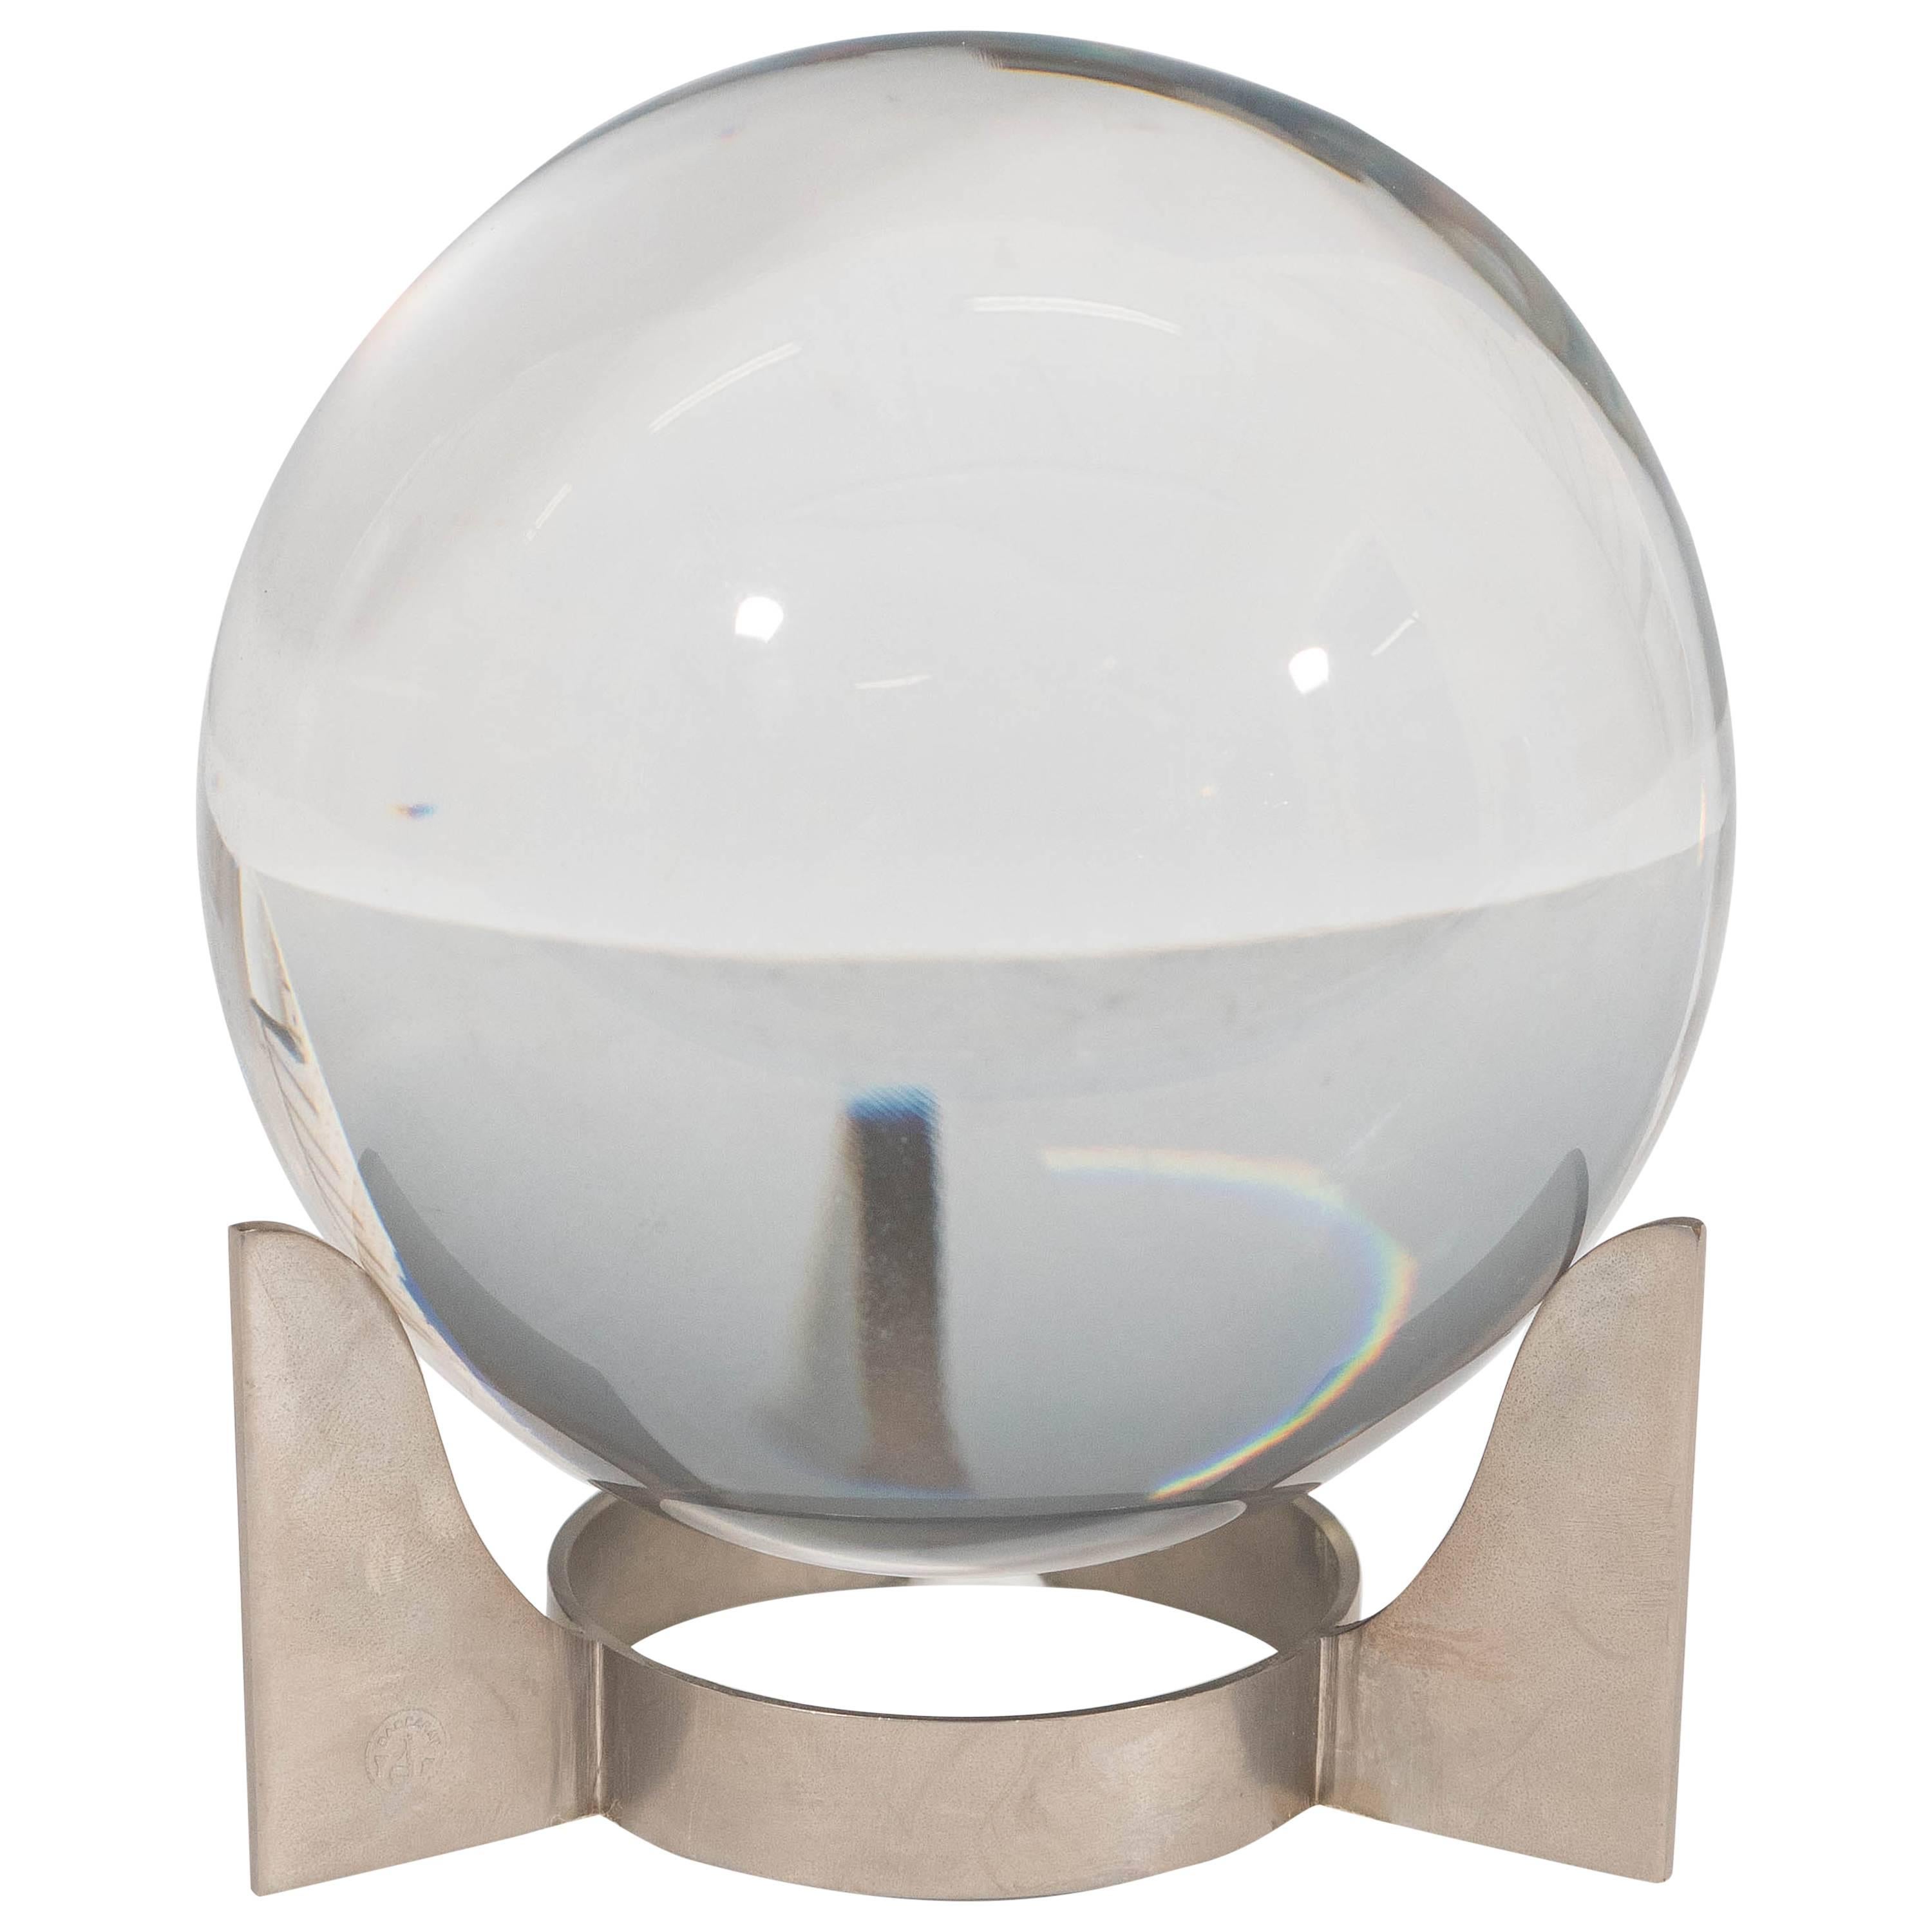 1940s Baccarat Sirius Crystal Ball on Nickel Plate Stand